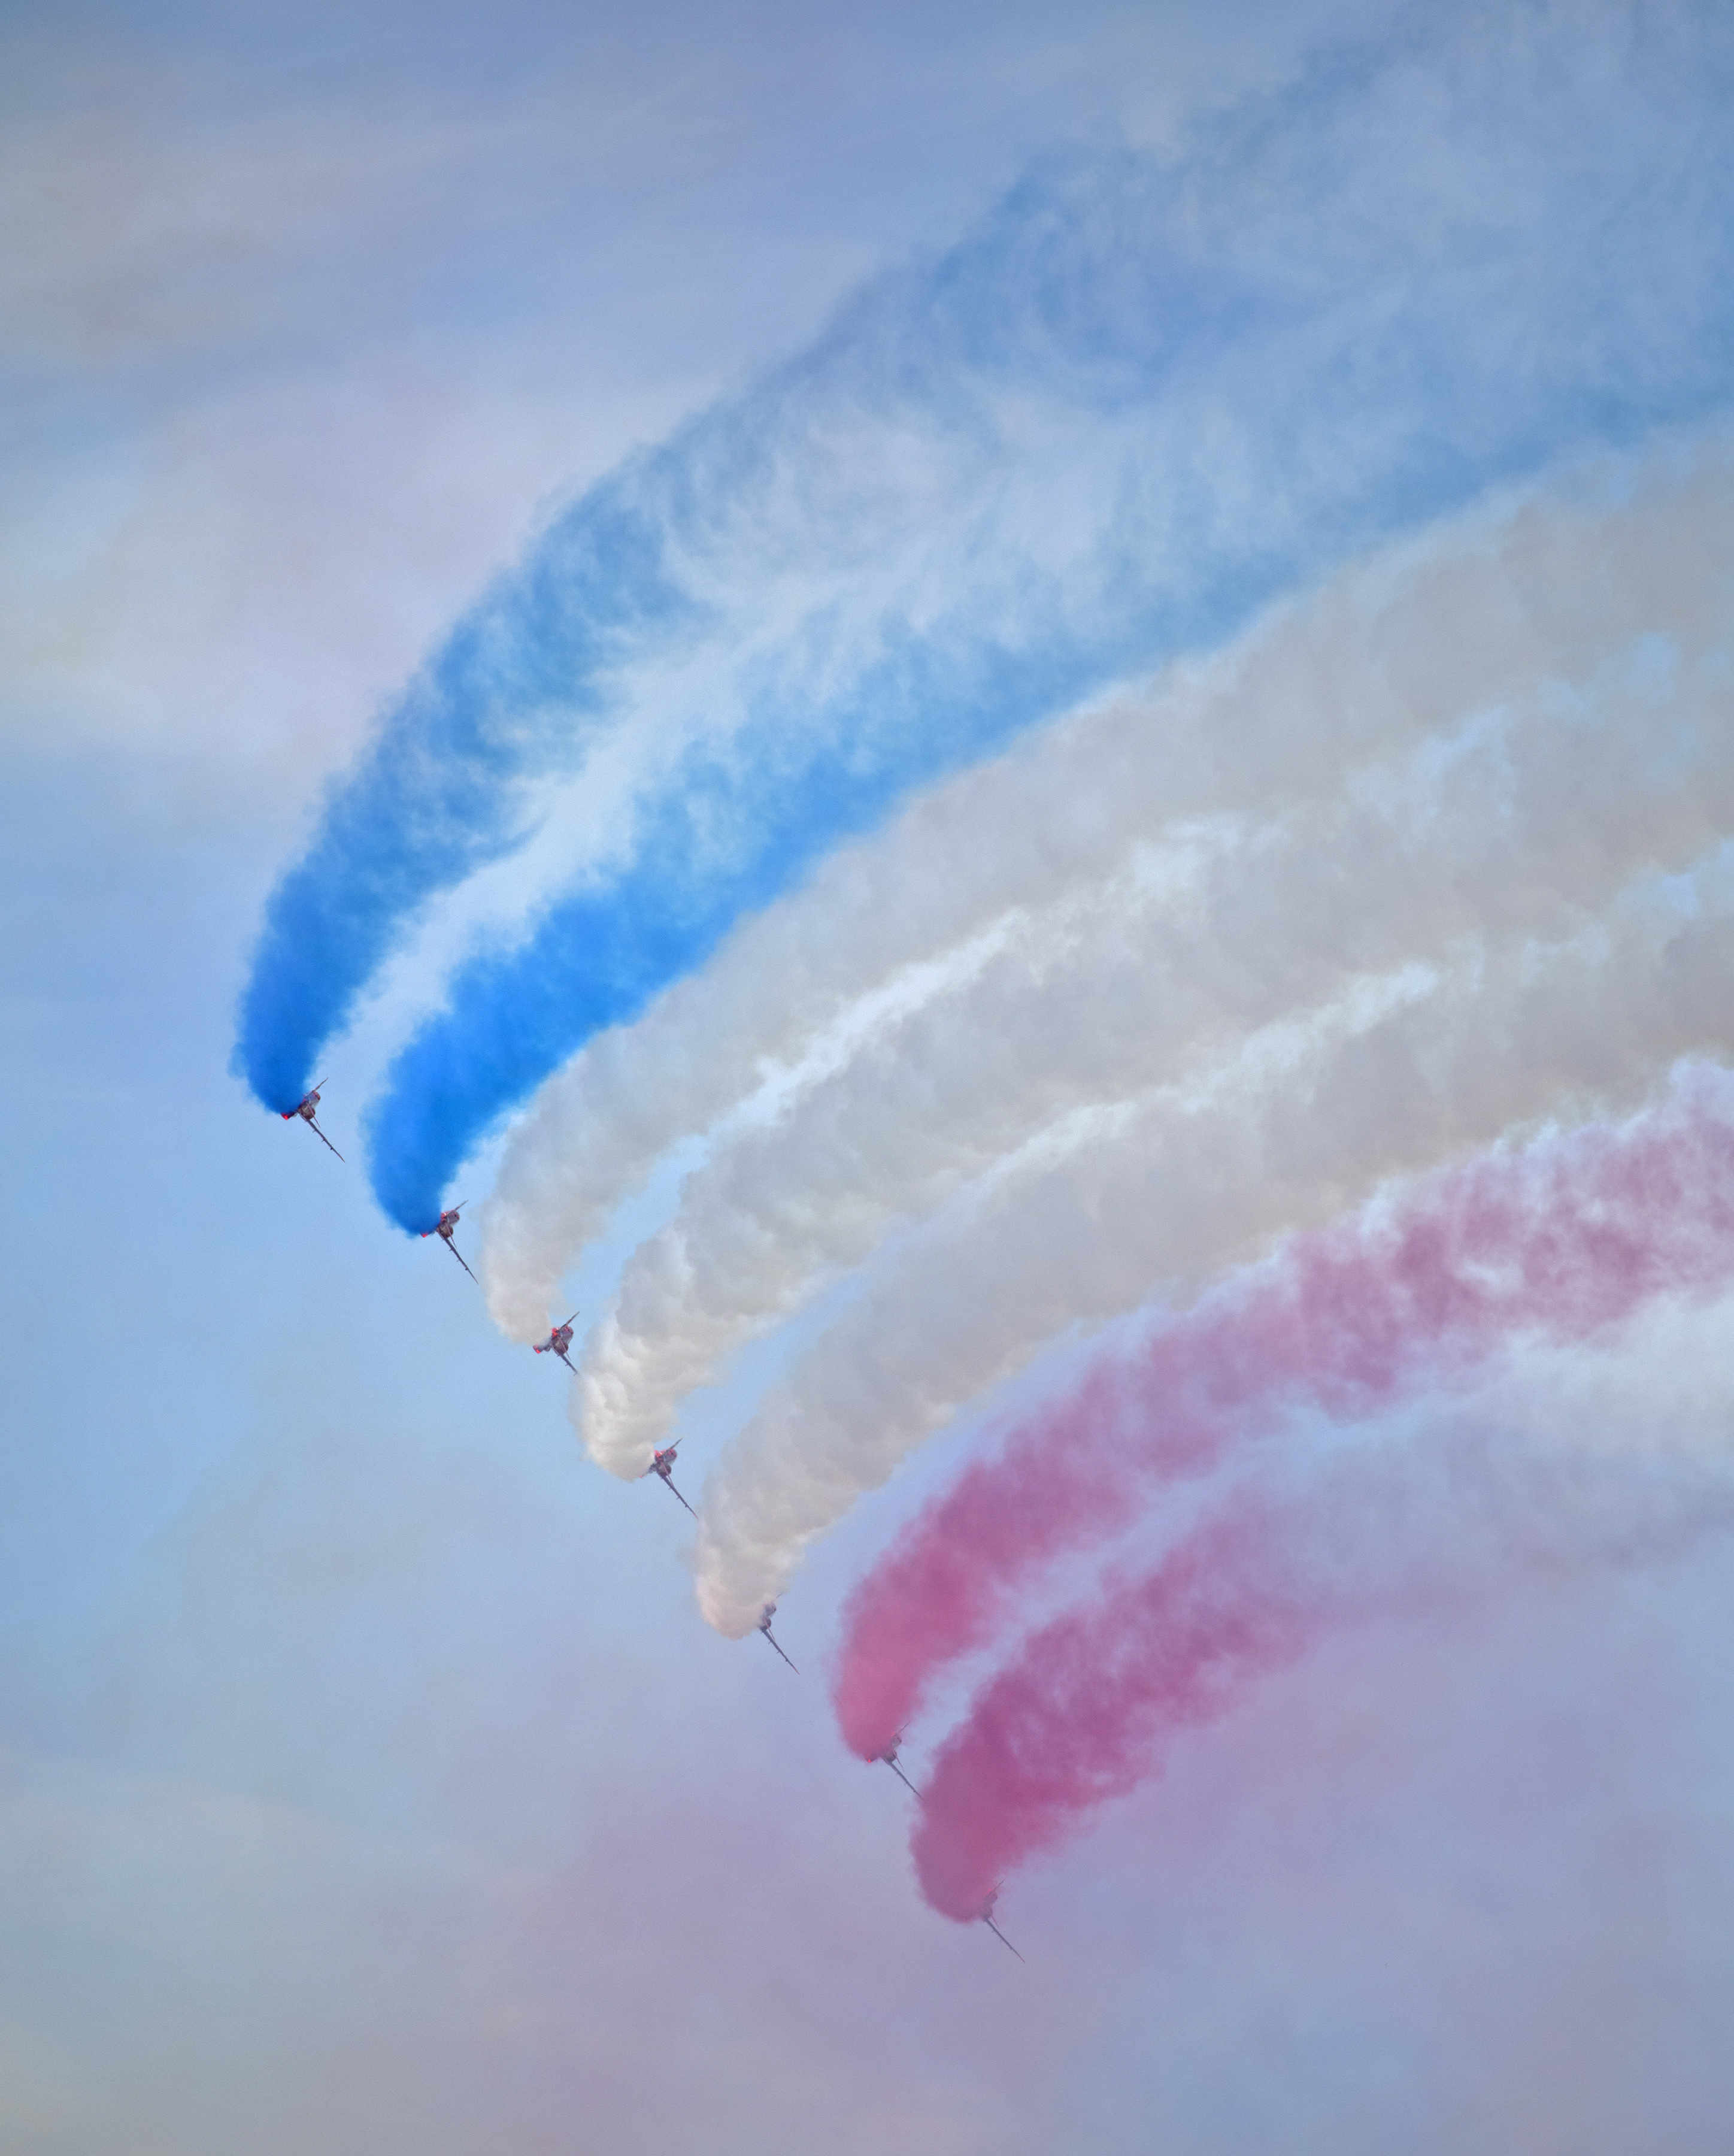 Image of the RAF Red arrows in formation with Union Jack smoke trails.